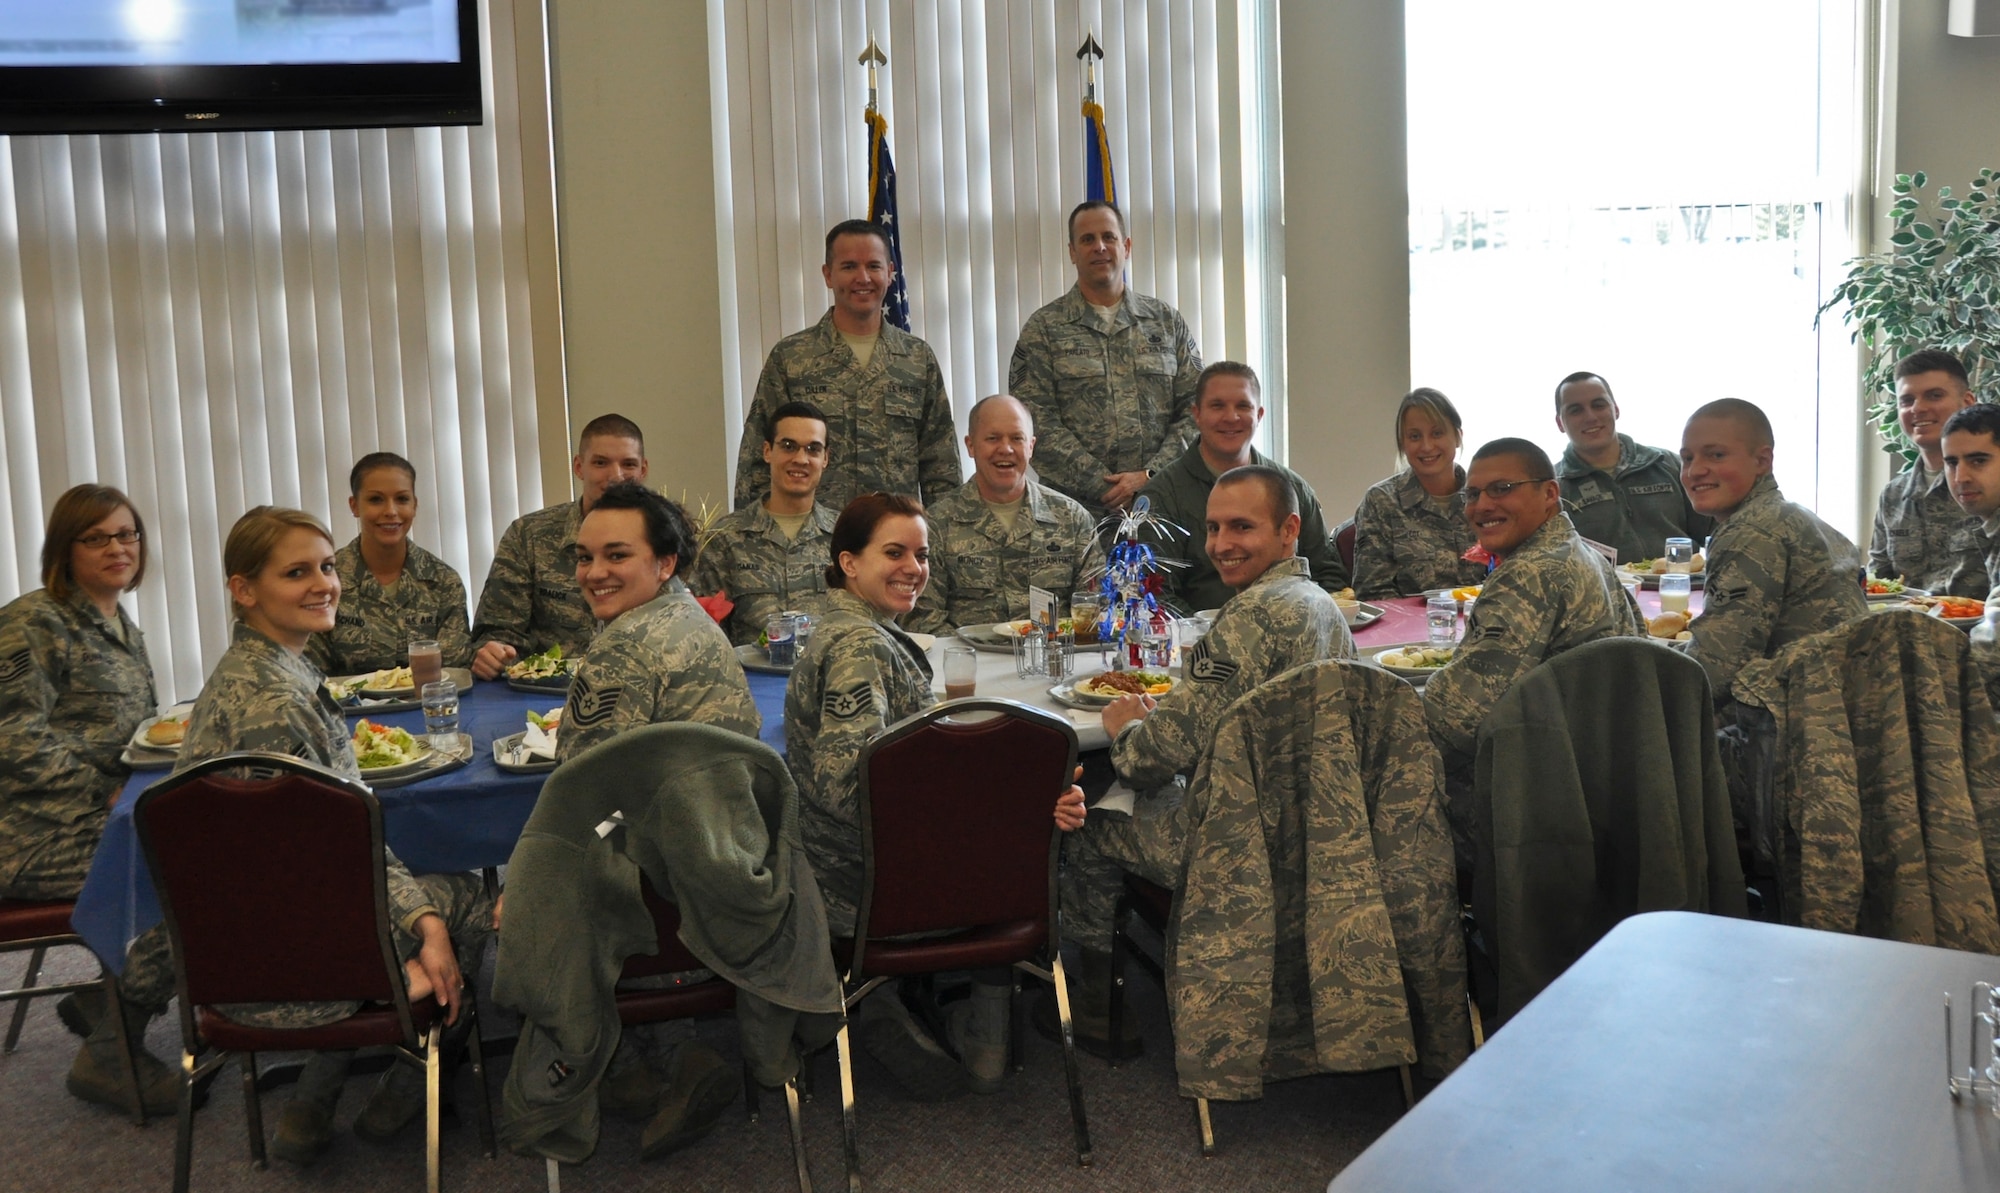 Command Chief Master Sgt. Christopher E. Muncy, command chief of the Air National Guard, prepares to eat lunch and converse with 15 members of the 128th Air Refueling Wing's enlisted Airmen in Milwaukee on January 08, 2012. Muncy was at the 128 ARW as part of a tour of all the Air National Guard bases located in Wisconsin. USAF Photograph by Staff Sgt. Jeremy Wilson